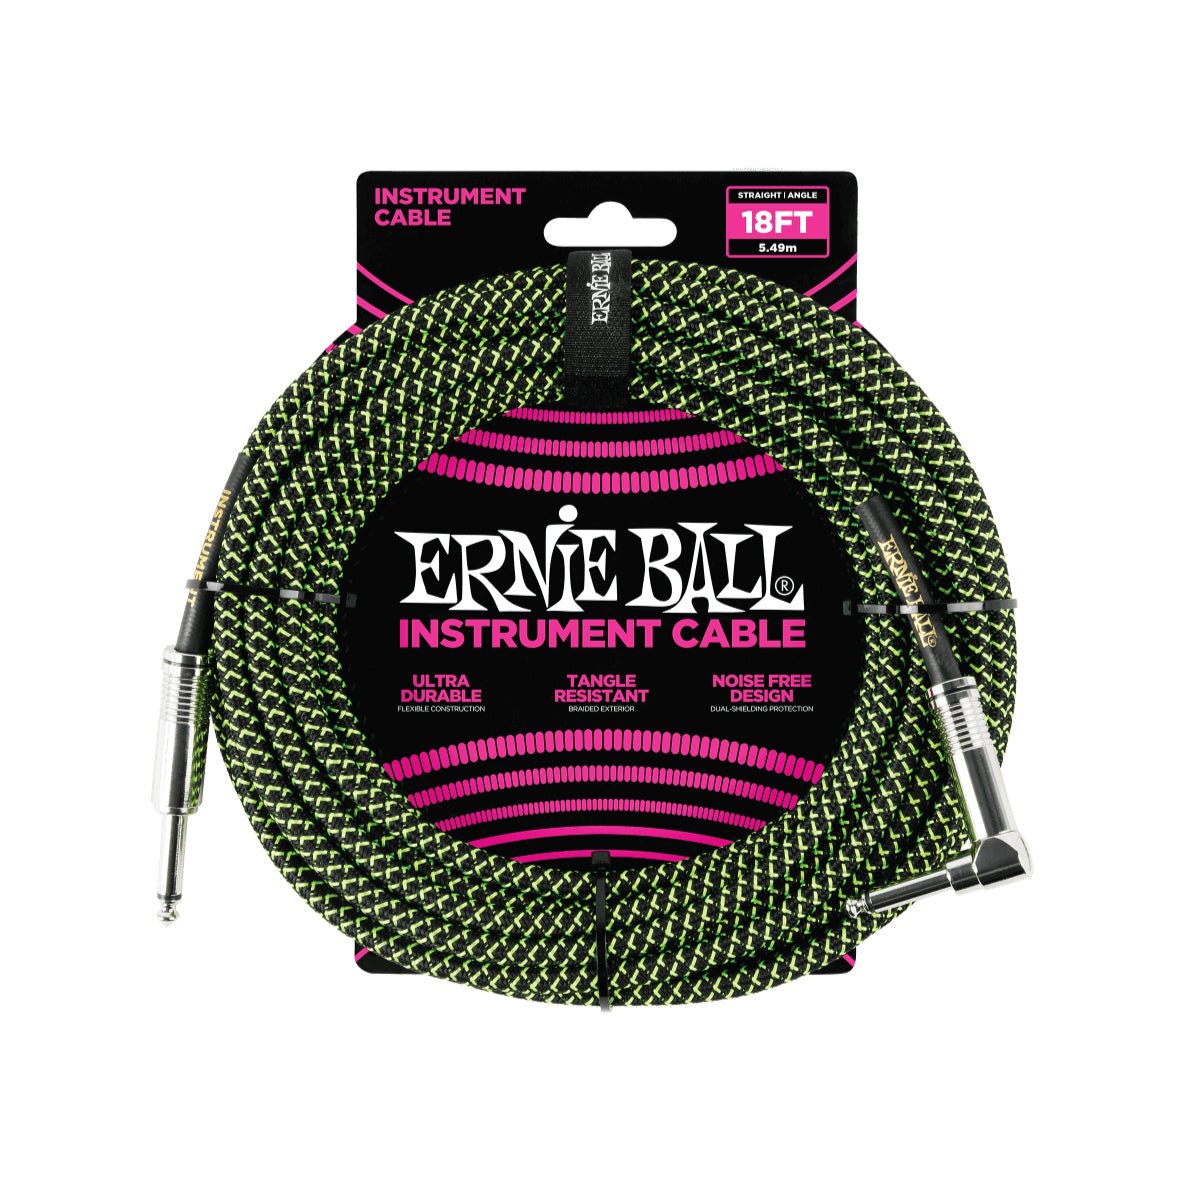 Ernie Ball 18' Braided Straight / Angle Instrument Cable